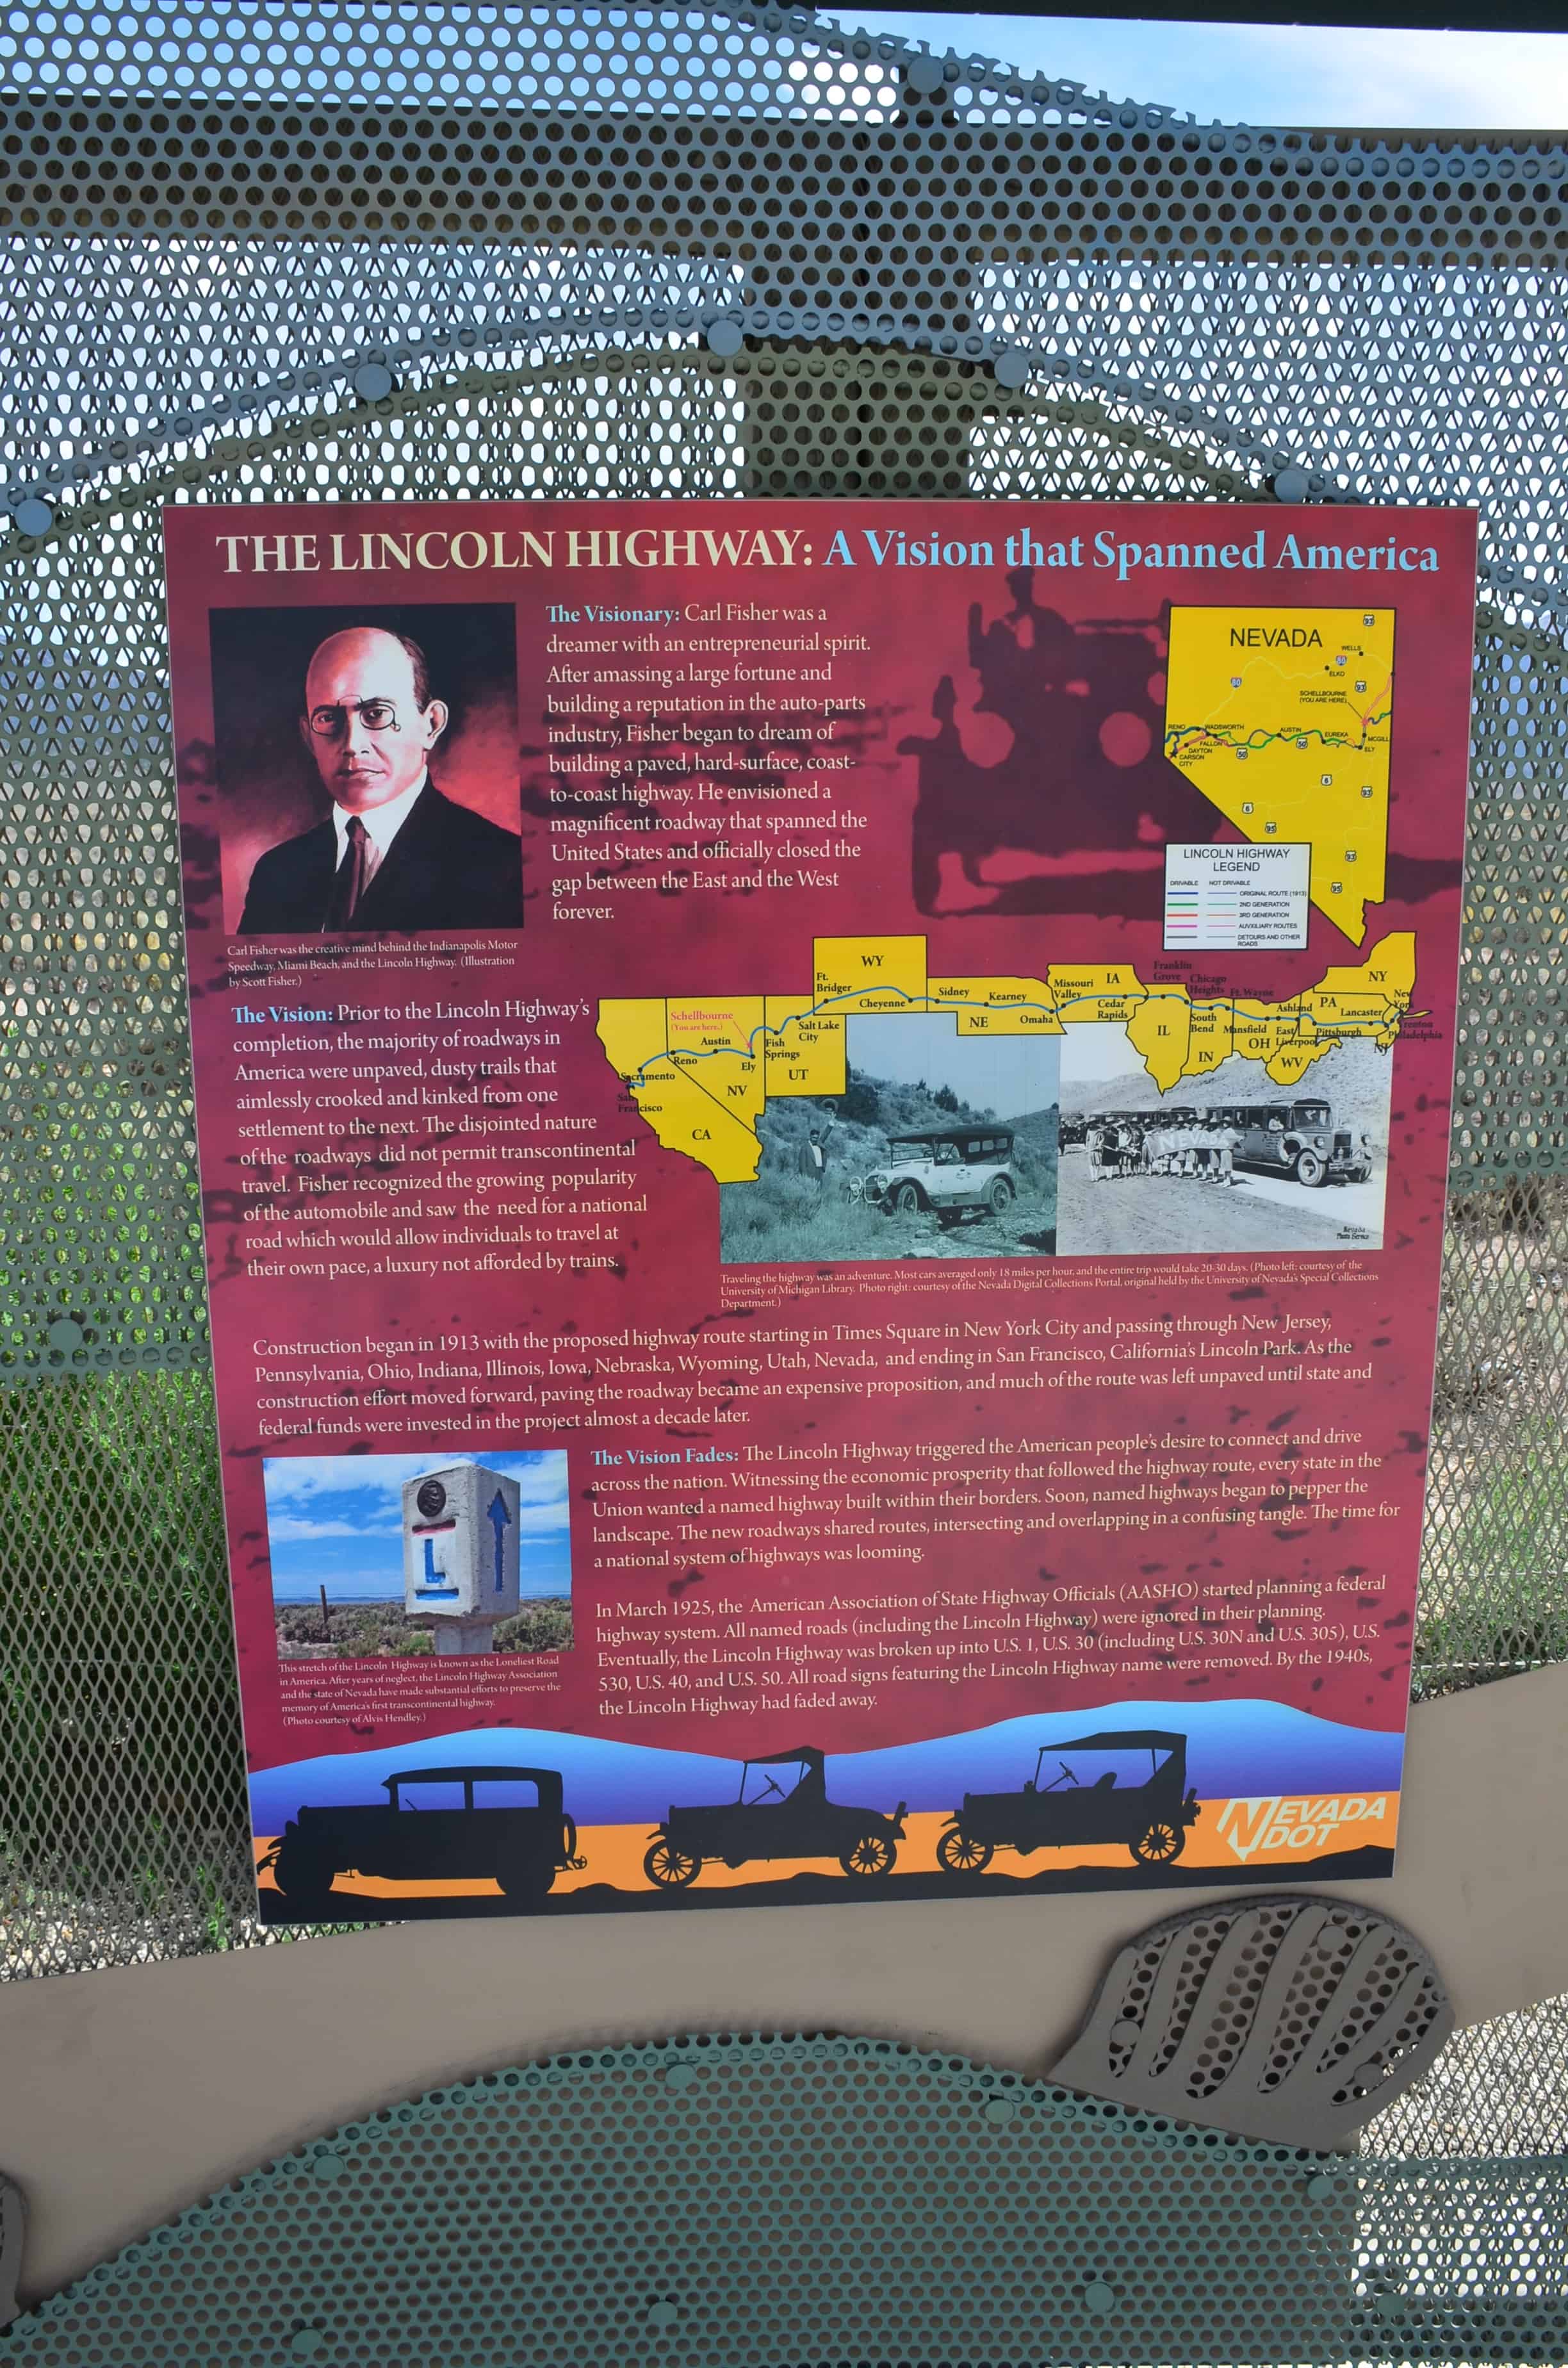 Lincoln Highway panel at the Schellbourne Rest Area in Nevada